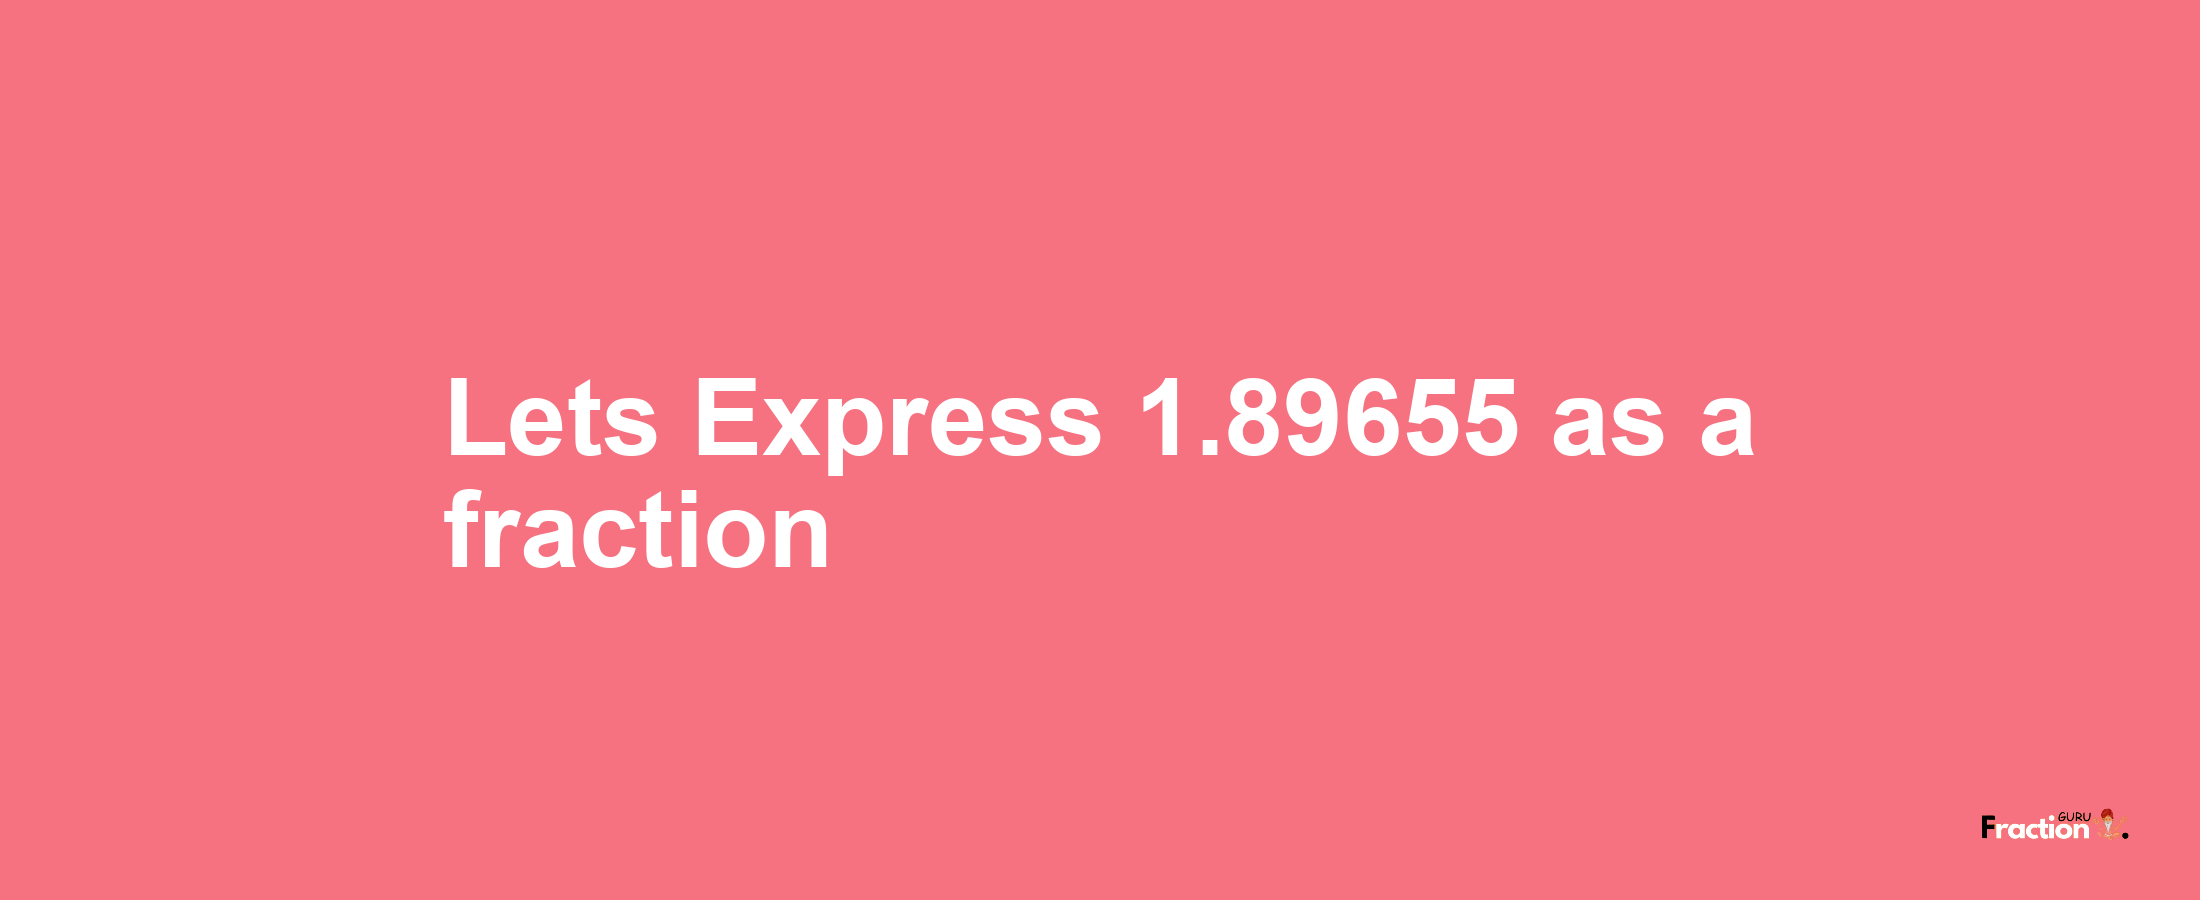 Lets Express 1.89655 as afraction